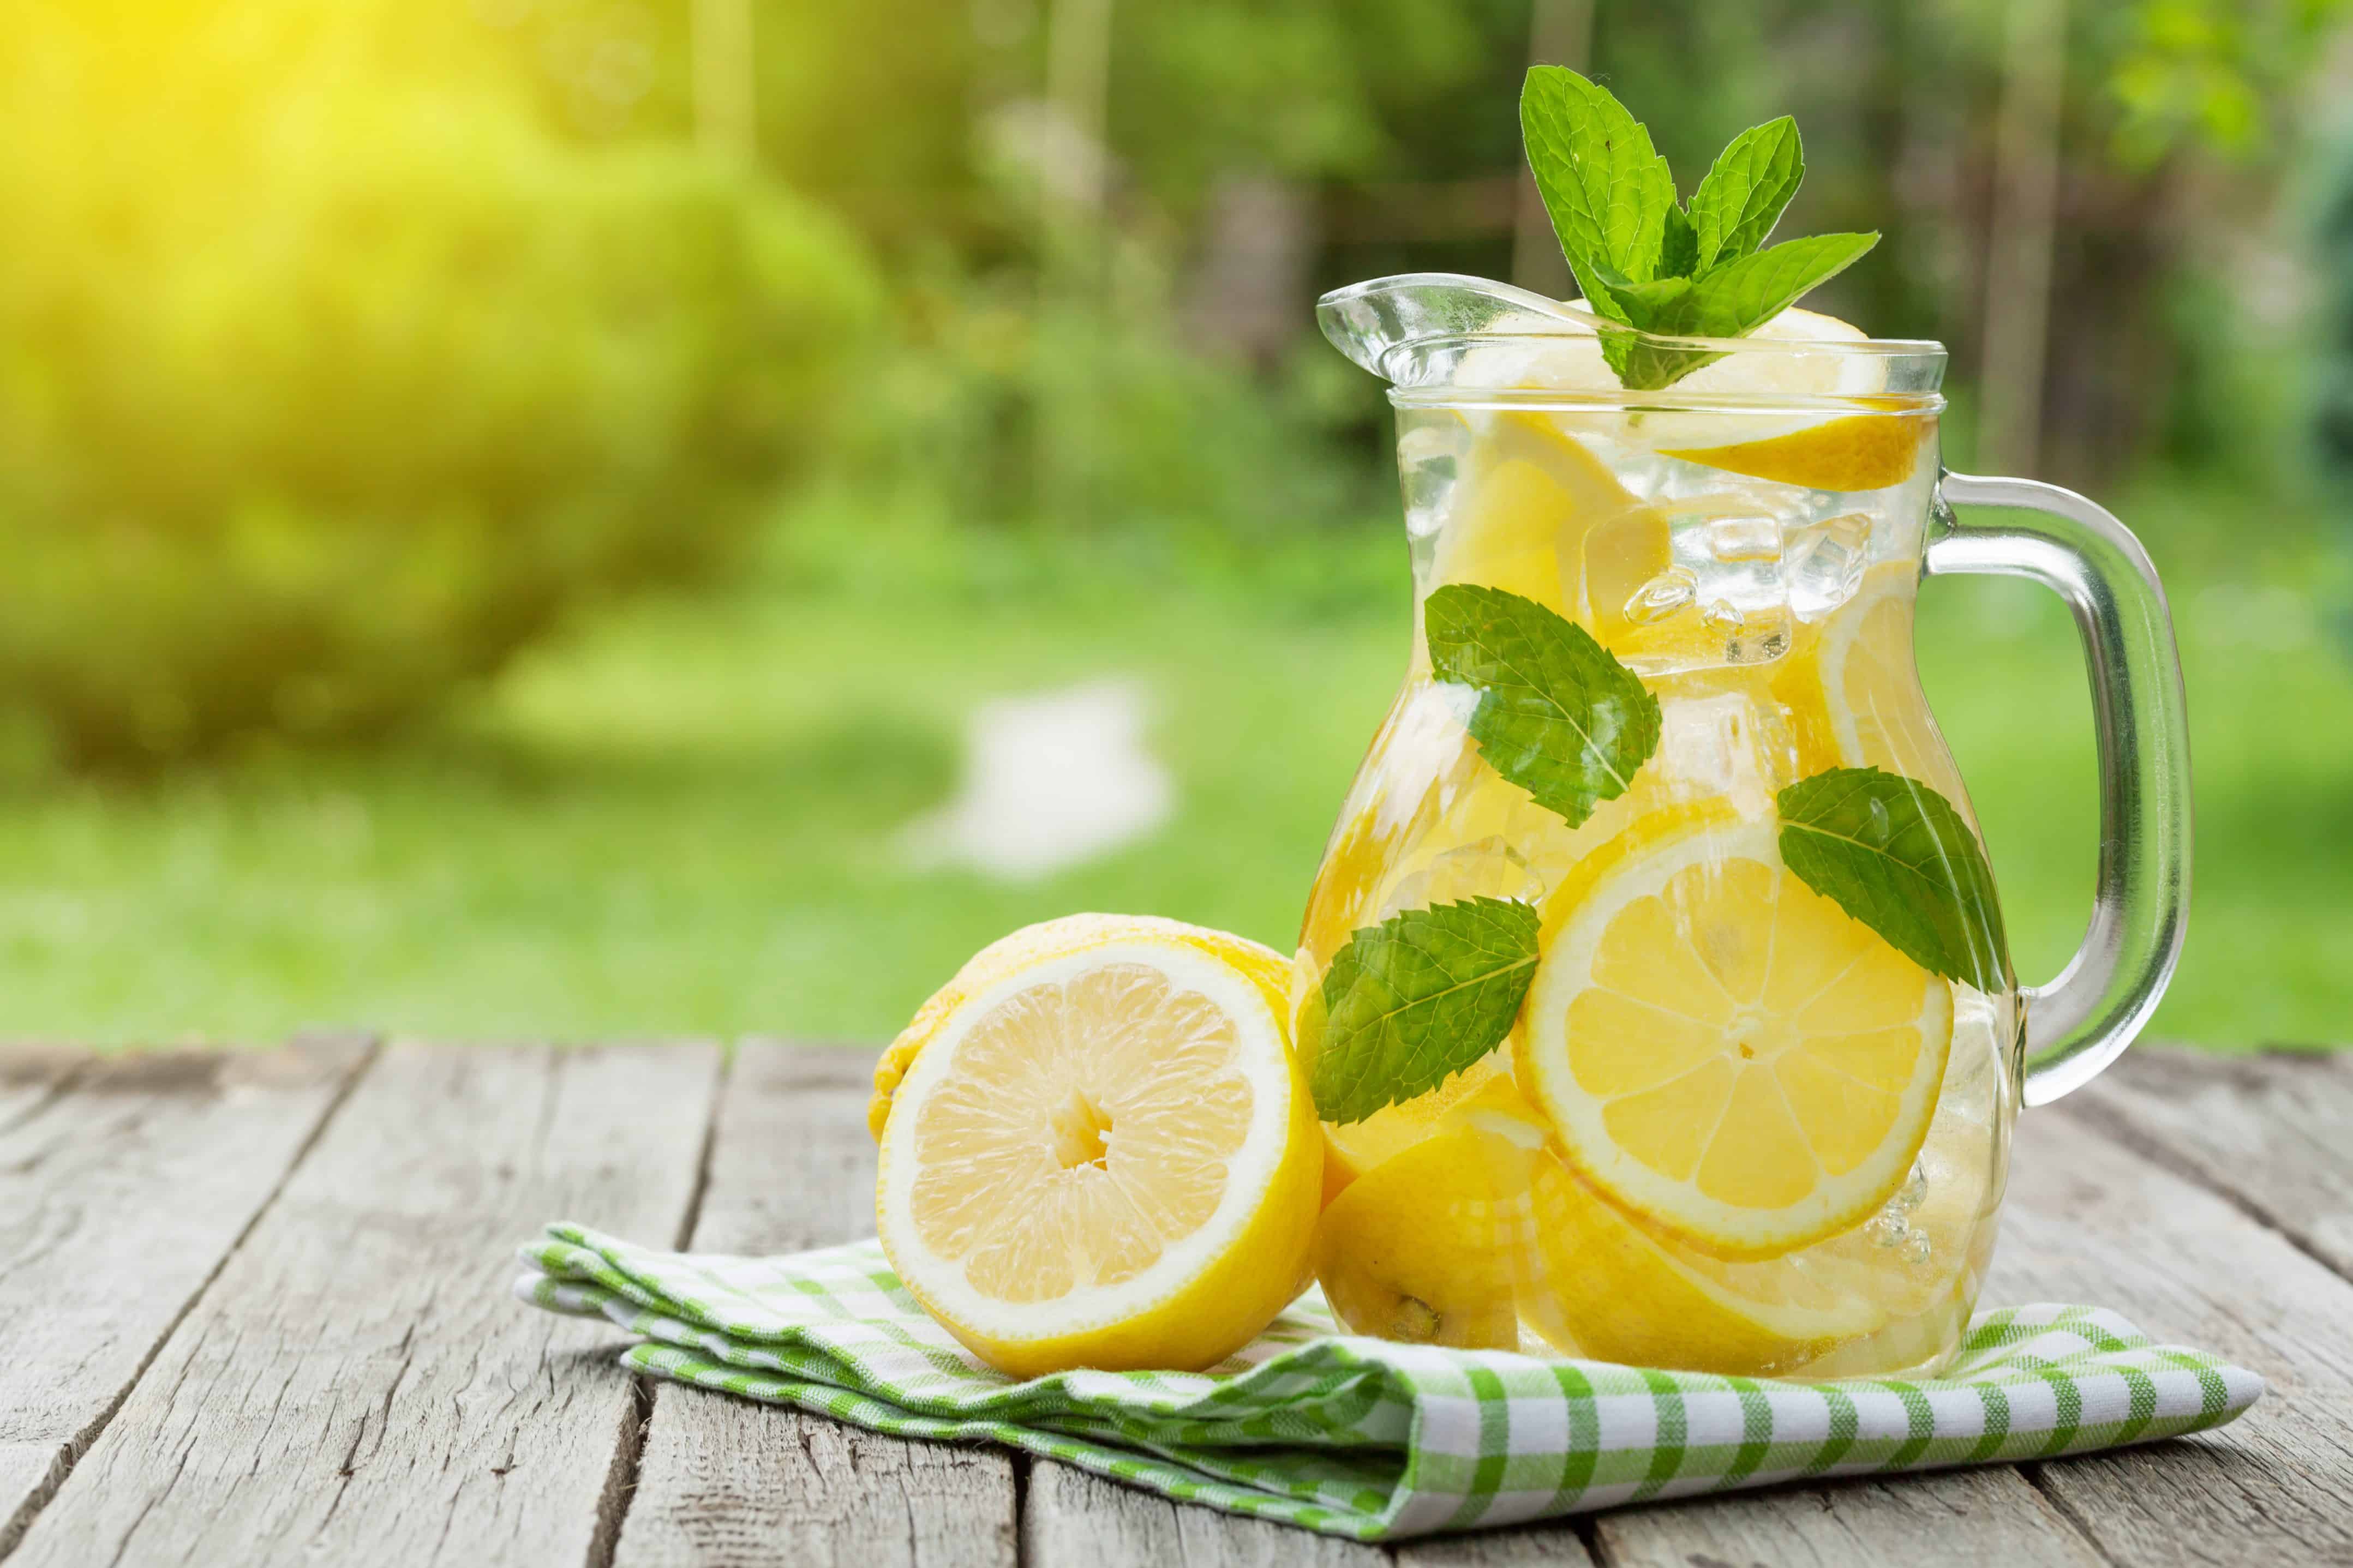 Lemonade pitcher with lemon, mint and ice on garden table. View with copy space